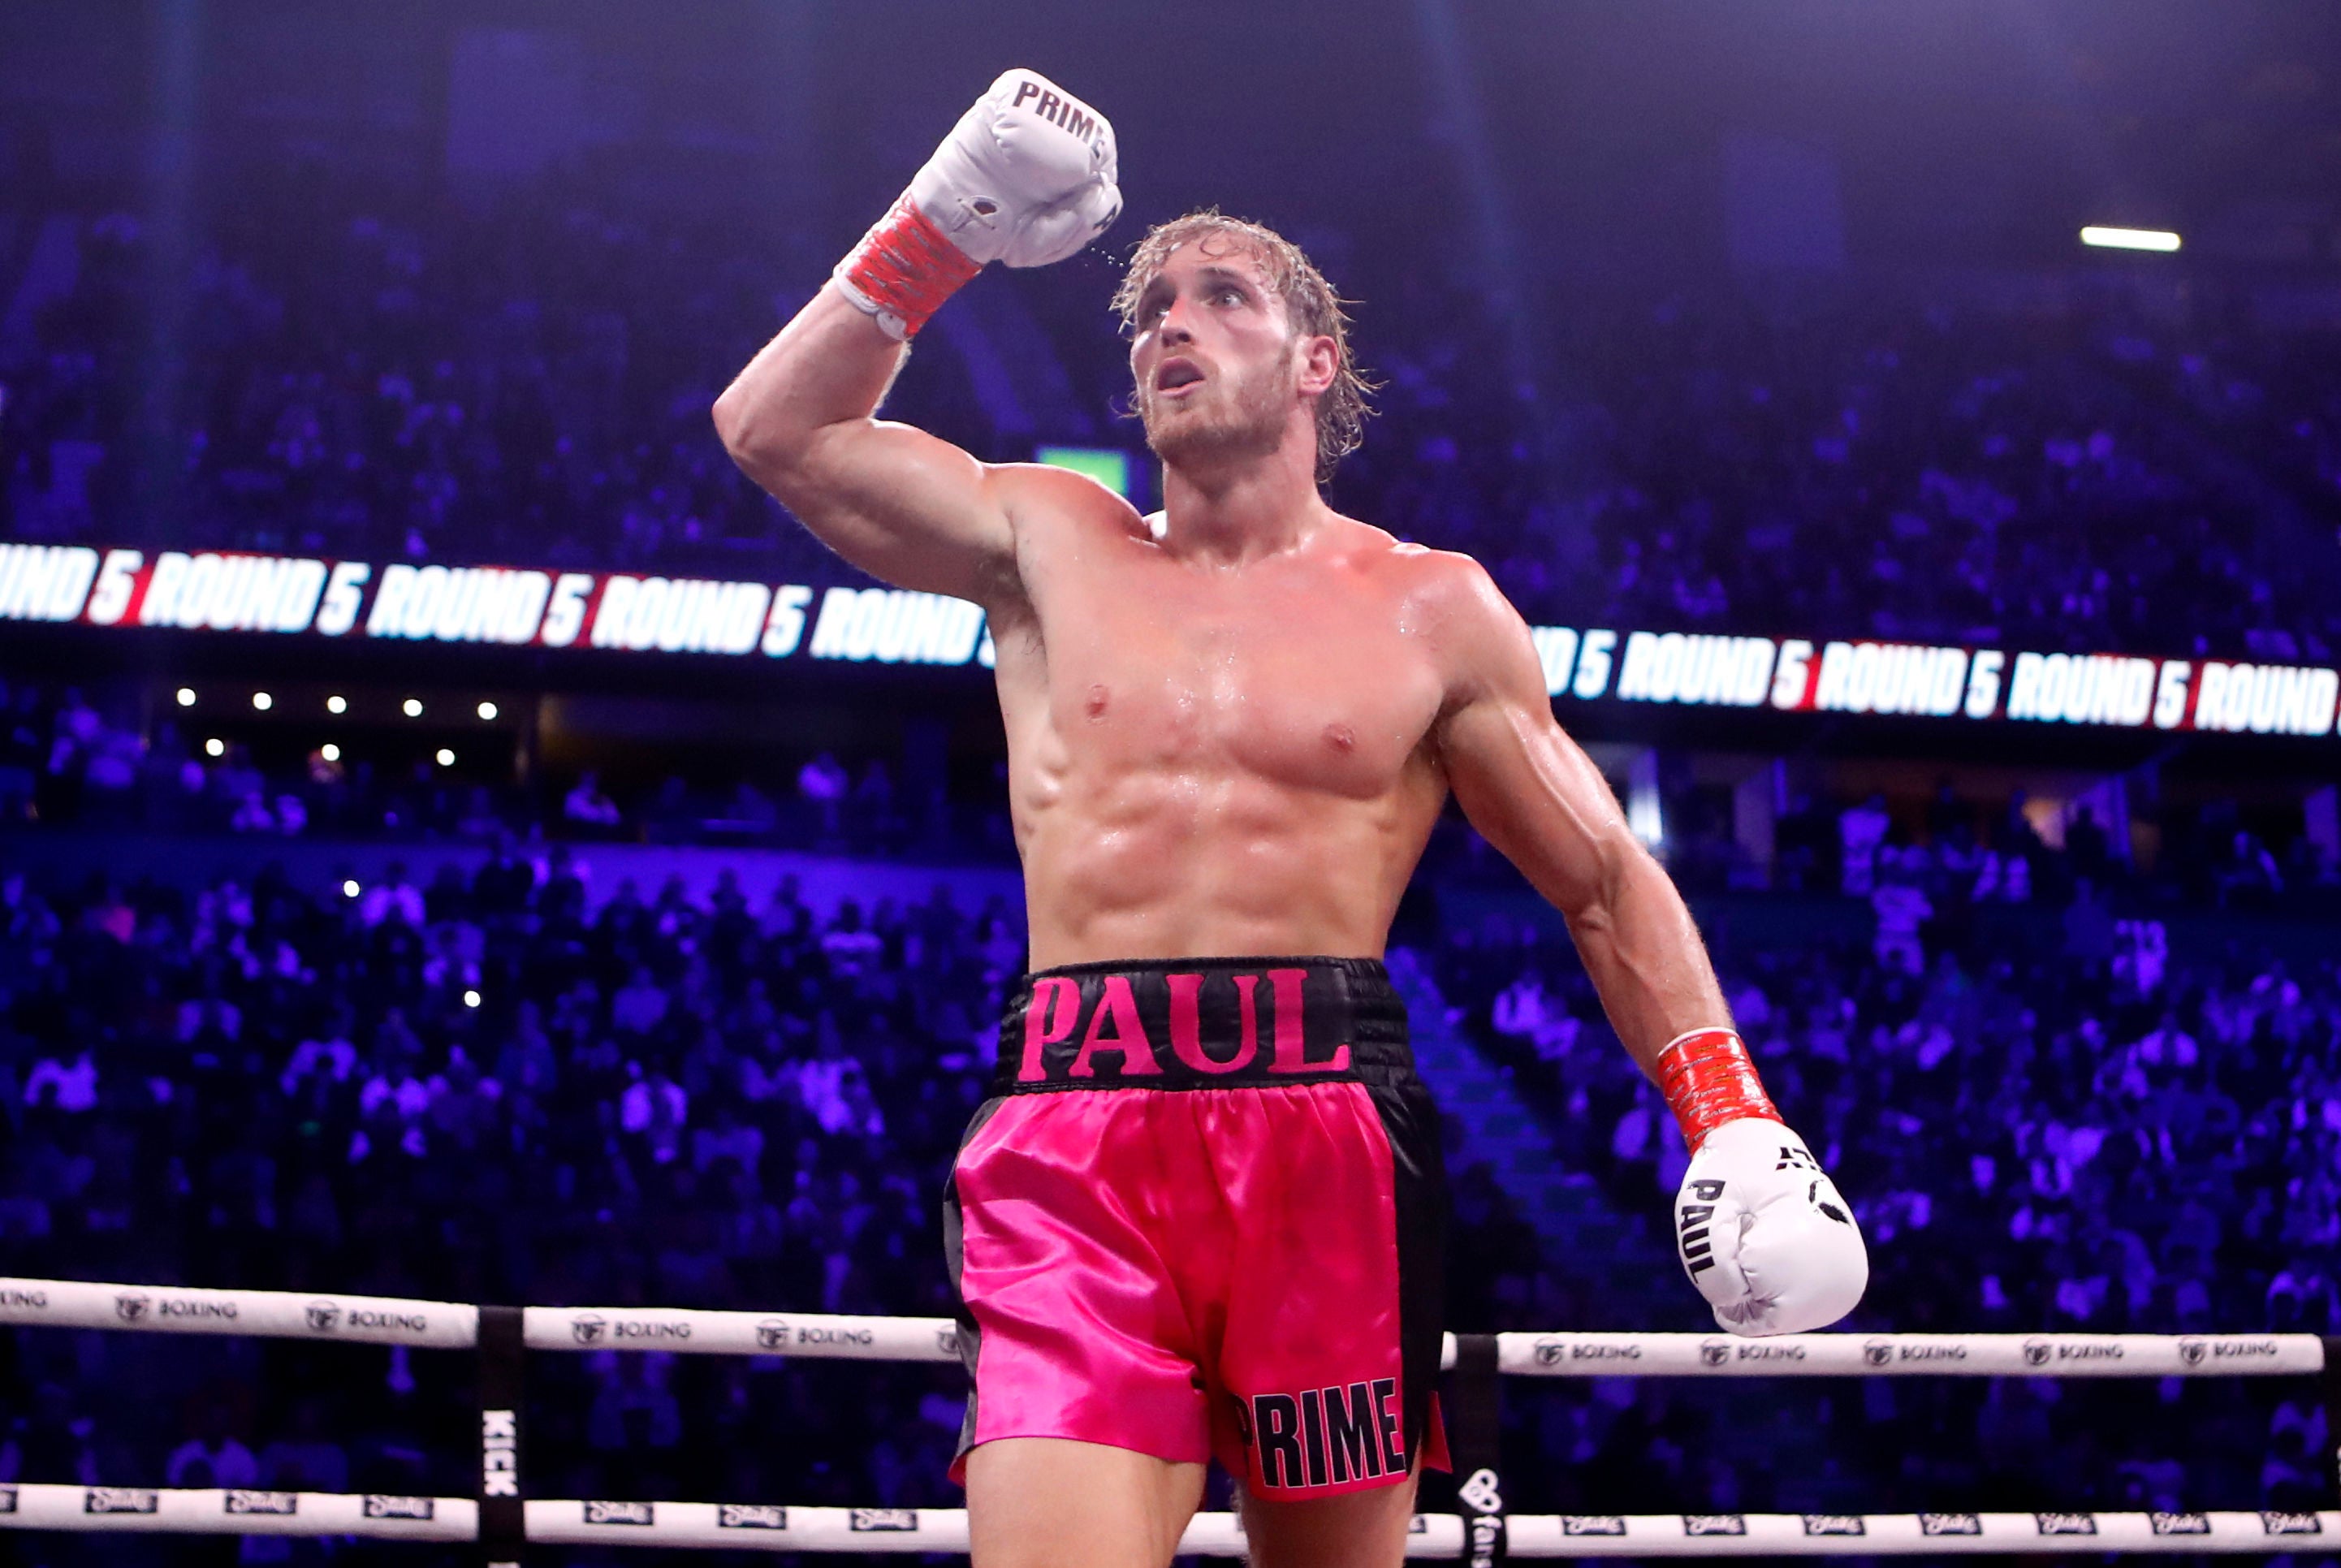 Paul after beating Dillon Danis in the boxing ring in October